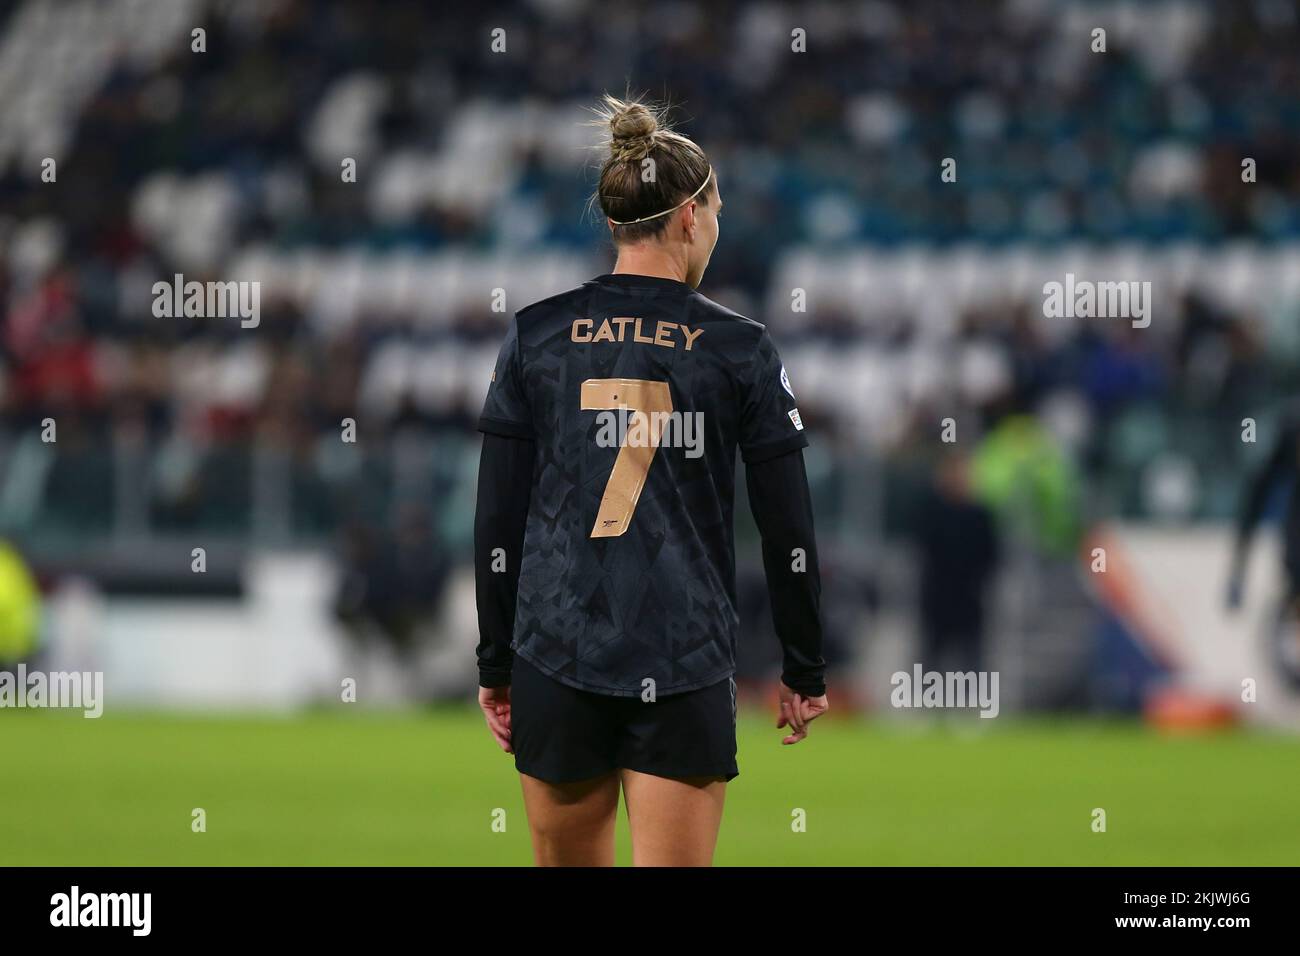 TURIN, ITALY, 24 NOVEMBER 2022. Steph Catley of Arsenal Women  during the UWCL match (Group C) between Juventus Women FC and Arsenal Women FC on November 24, 2022 at Allianz Stadium in Turin, Italy.  Credit: Massimiliano Ferraro/Alamy Live News Stock Photo